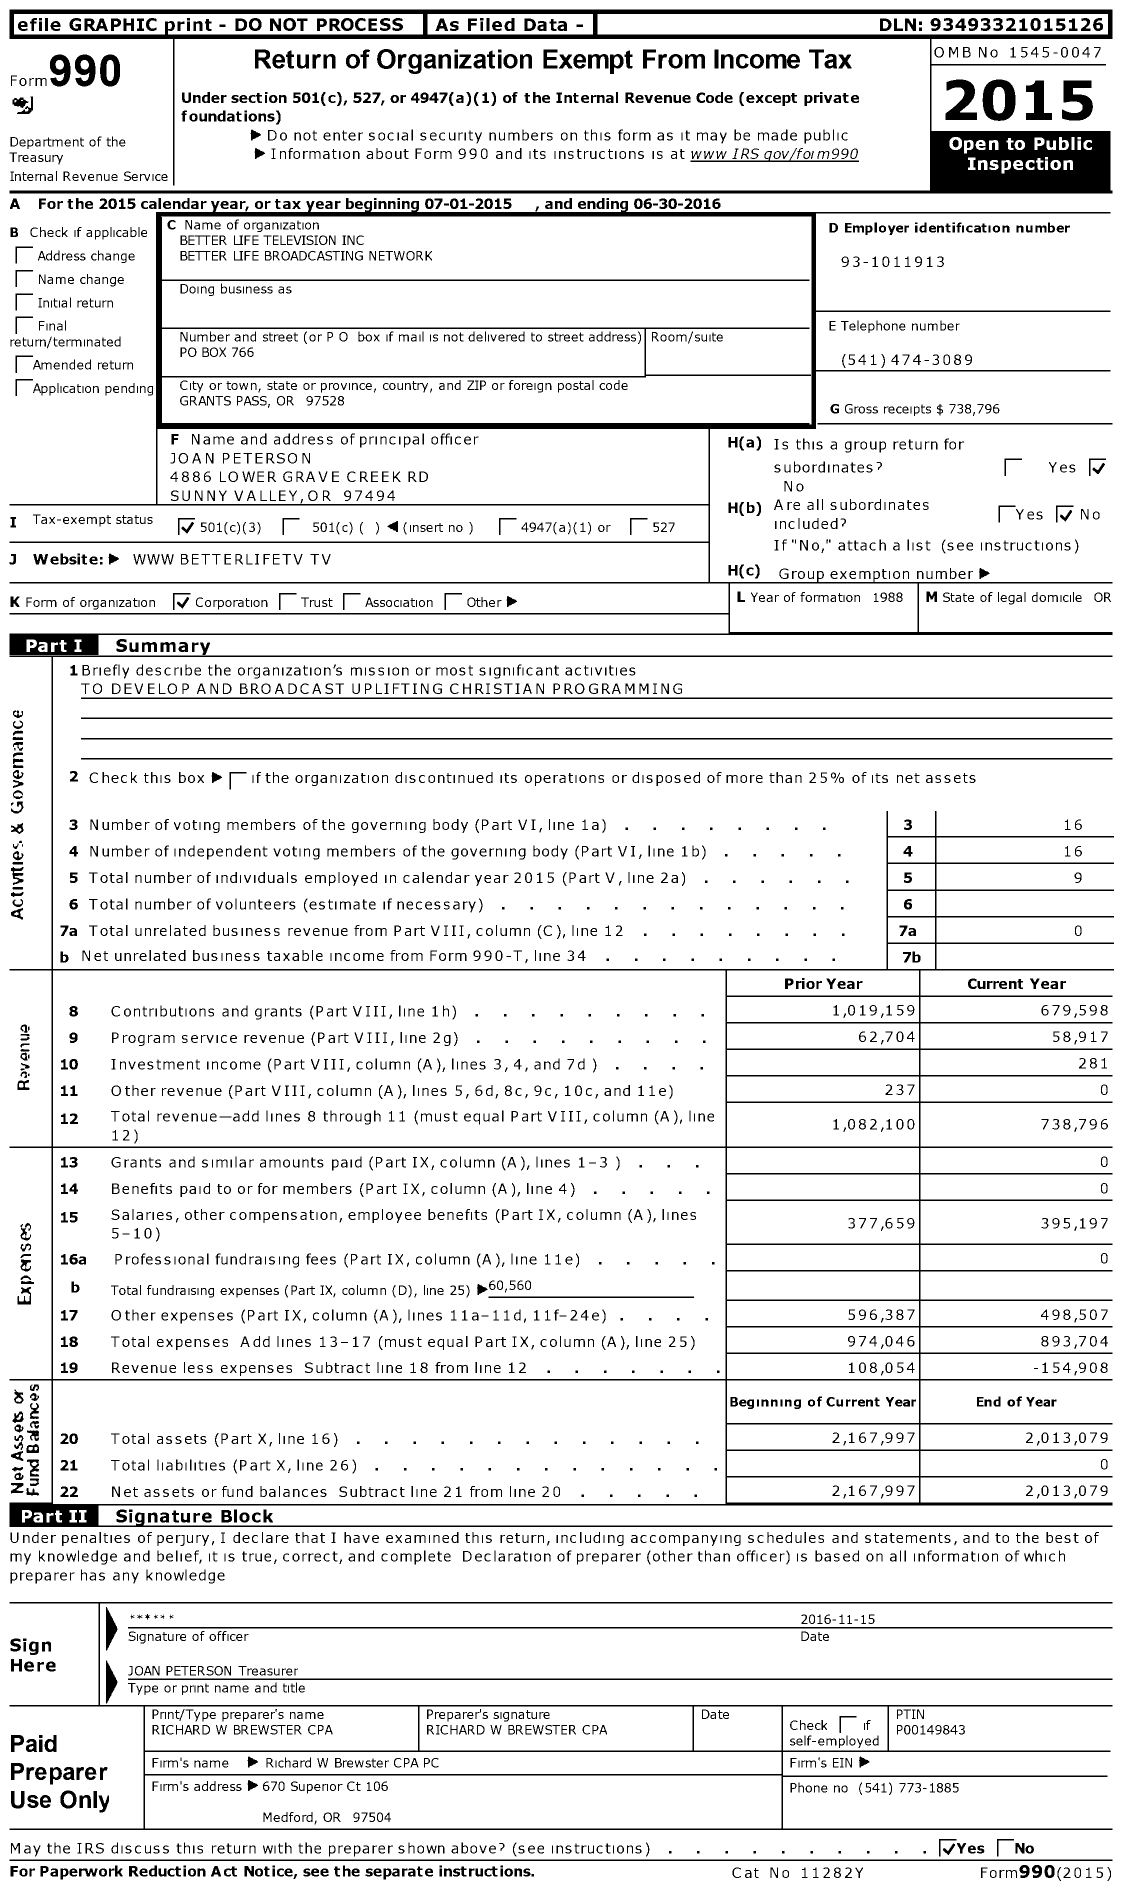 Image of first page of 2015 Form 990 for Better Life Television